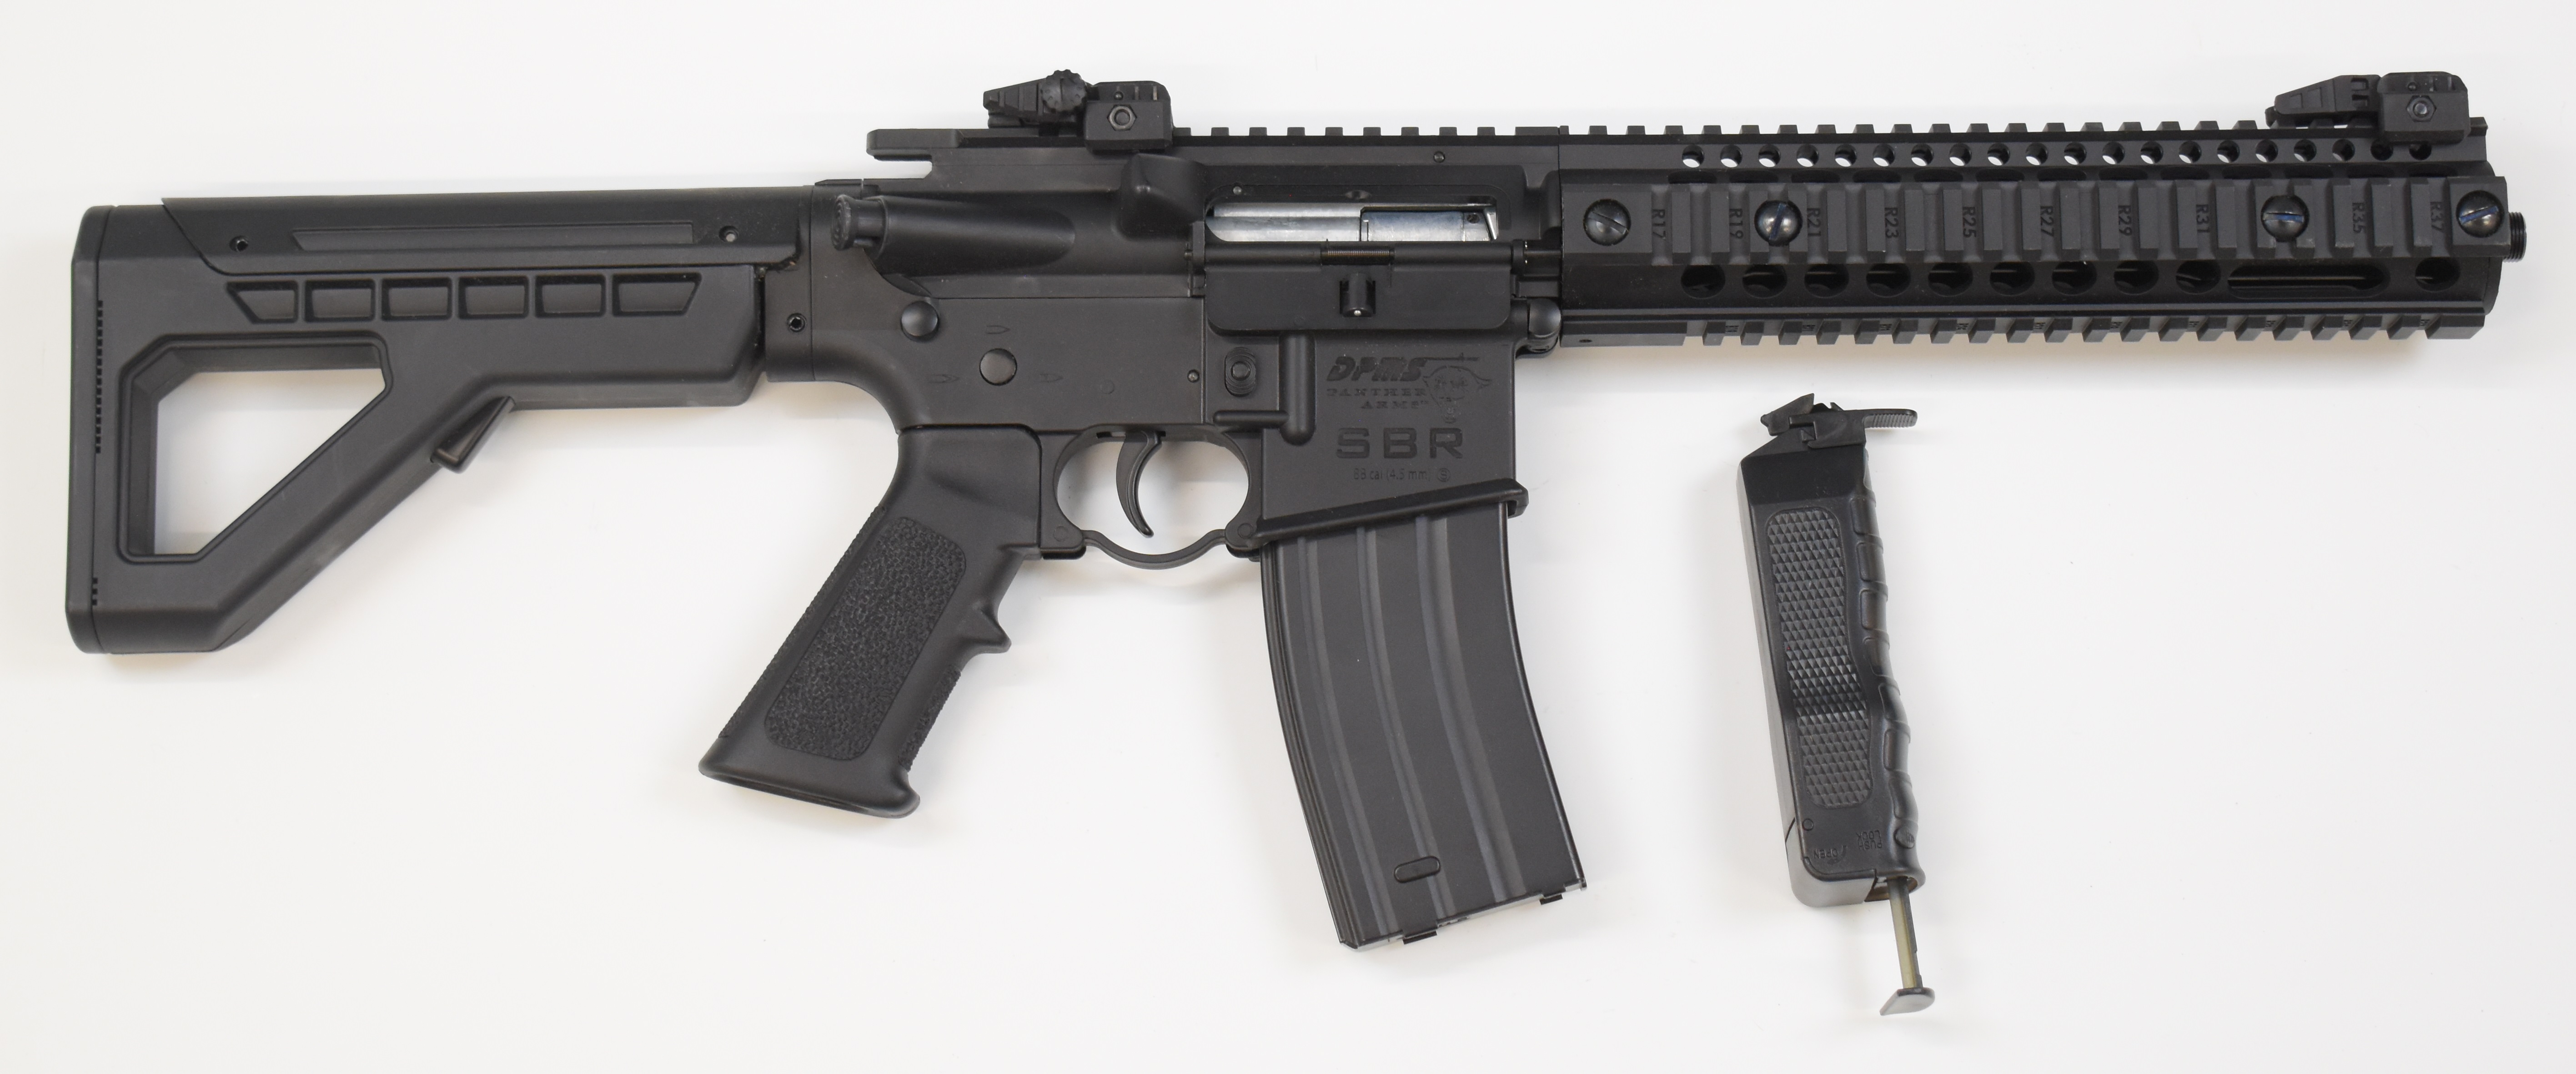 Crosman SBR .177 CO2 assault style air rifle with textured pistol grip, tactical stock, multi-shot - Image 2 of 9